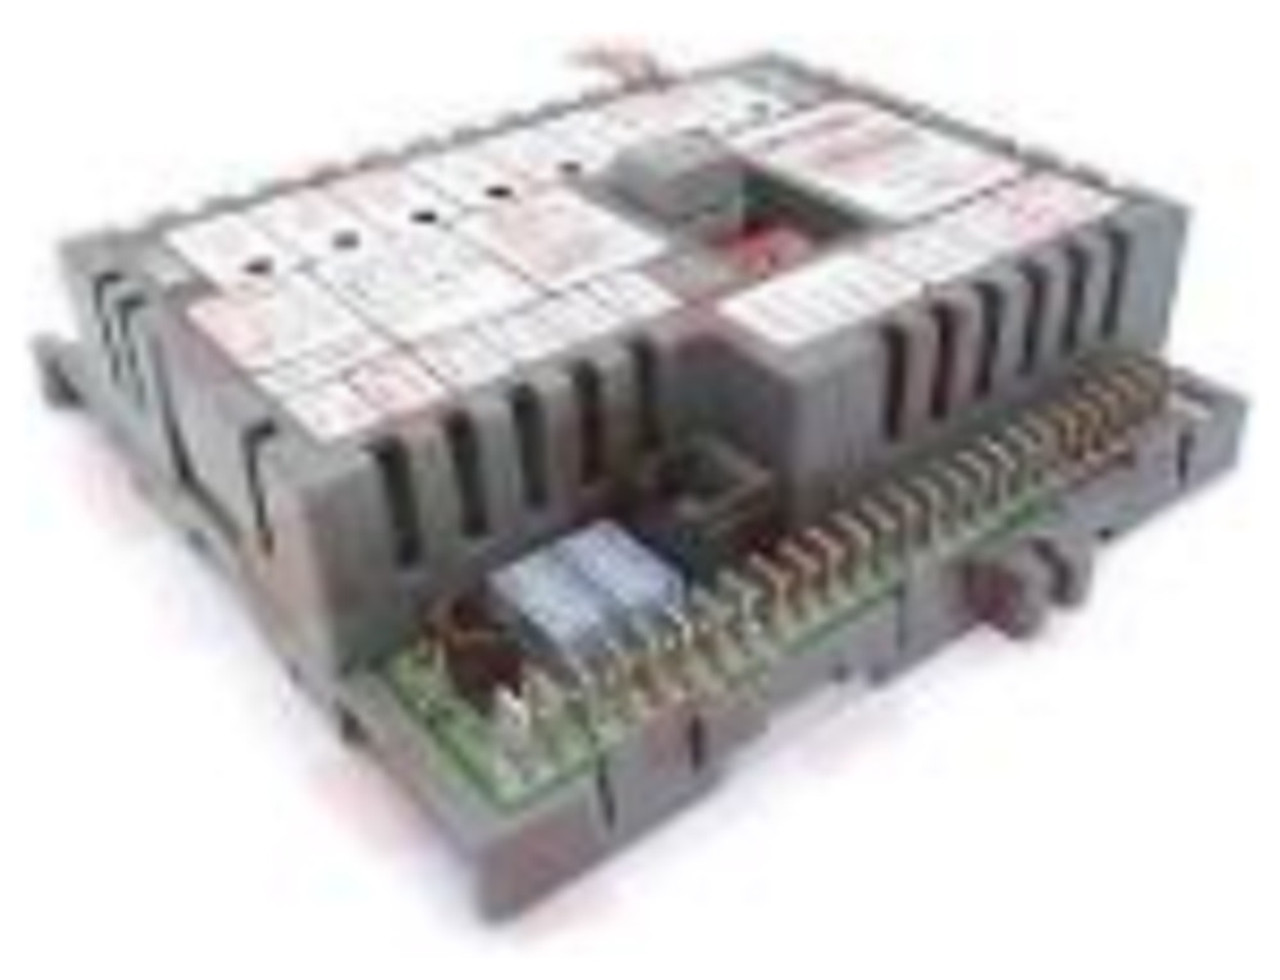 Johnson Controls AS-UNT1144-0 Unt1100 Series Unitary Controller, 6 Analog Input [New]